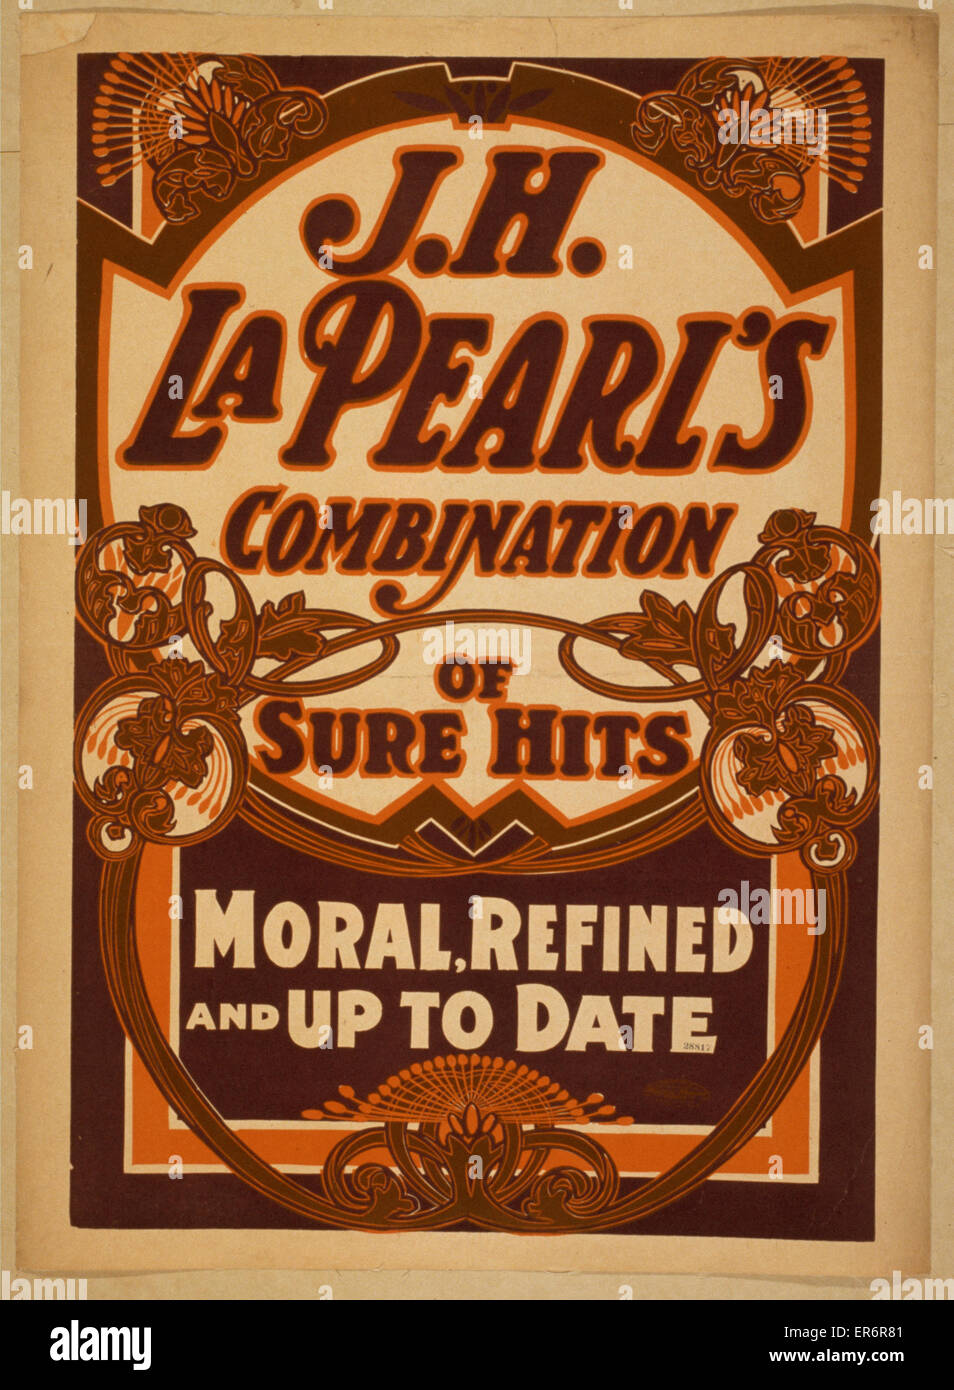 JH La Pearl's combination of sure hits moral, refined, and u Stock Photo